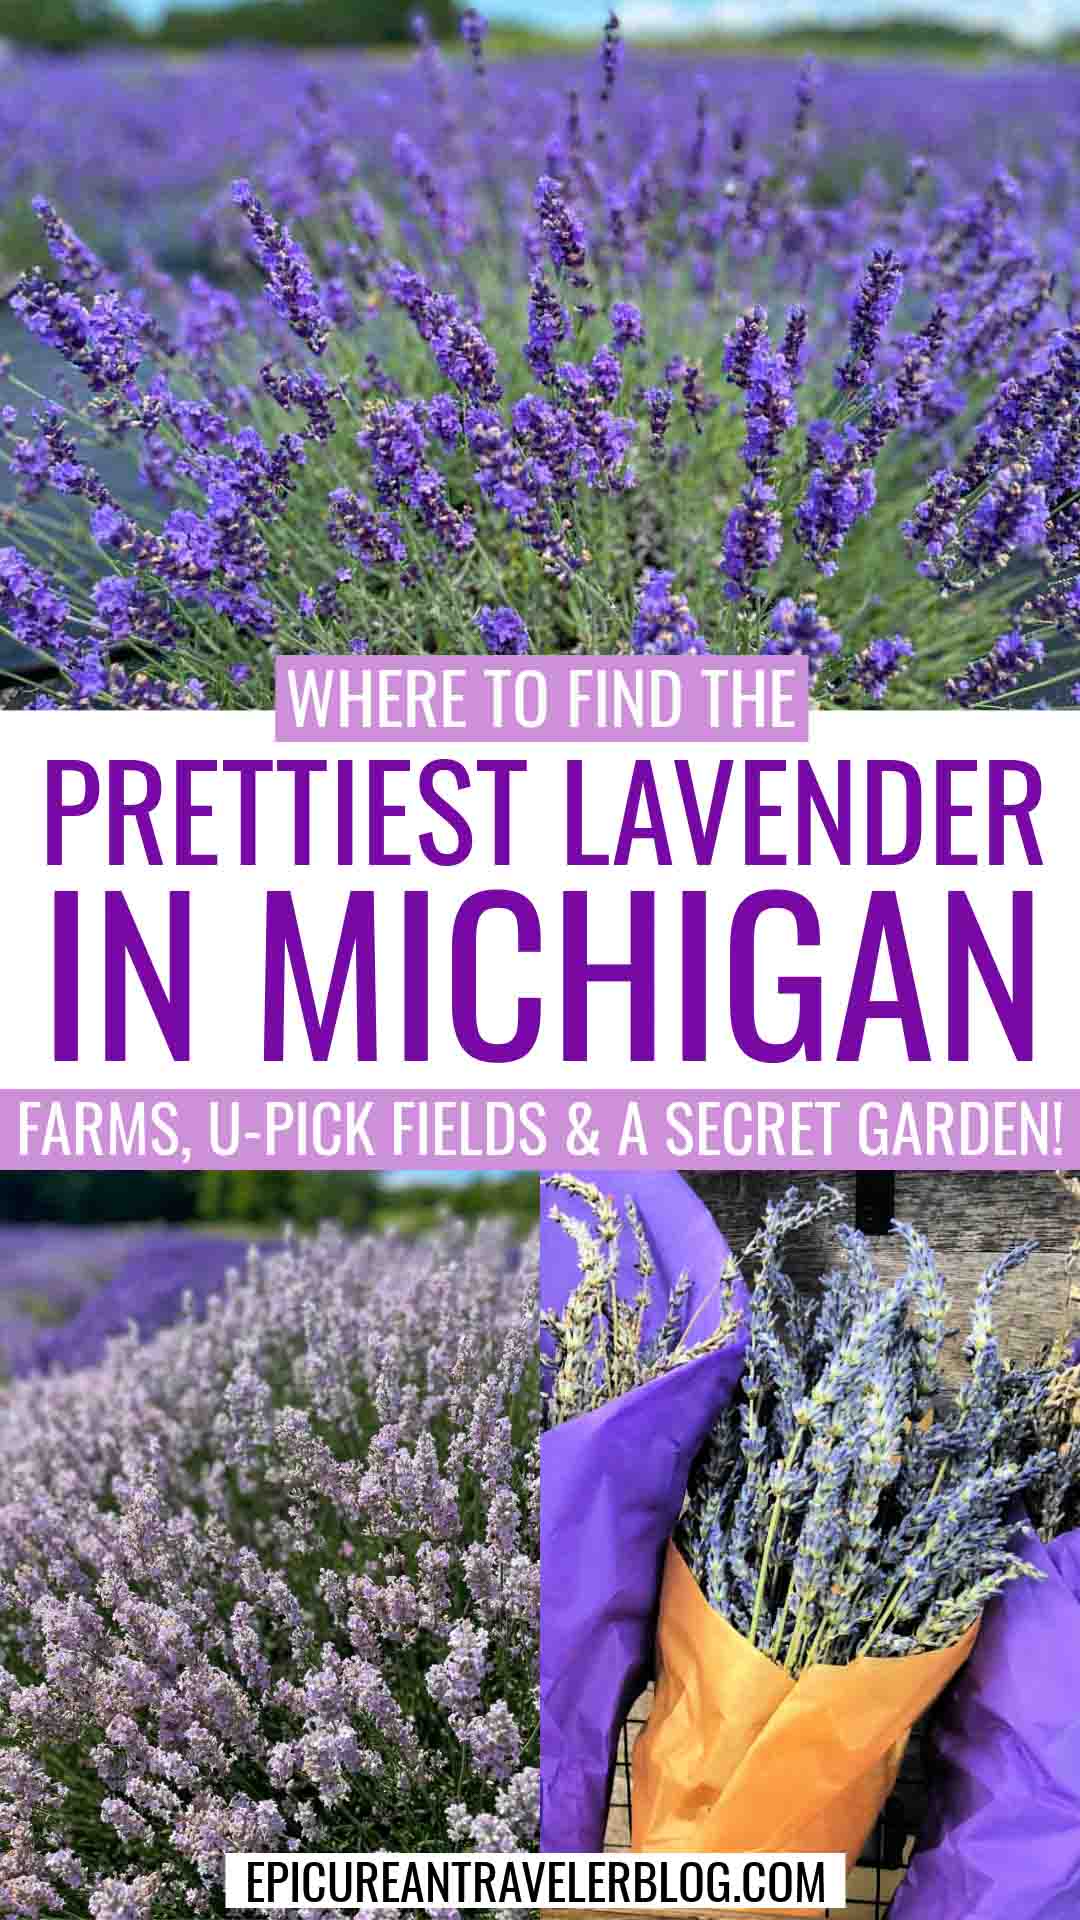 Where to find the prettiest lavender in Michigan at farms, u-pick fields, and a secret garden with images of lavender plants and bouquets of dried lavender